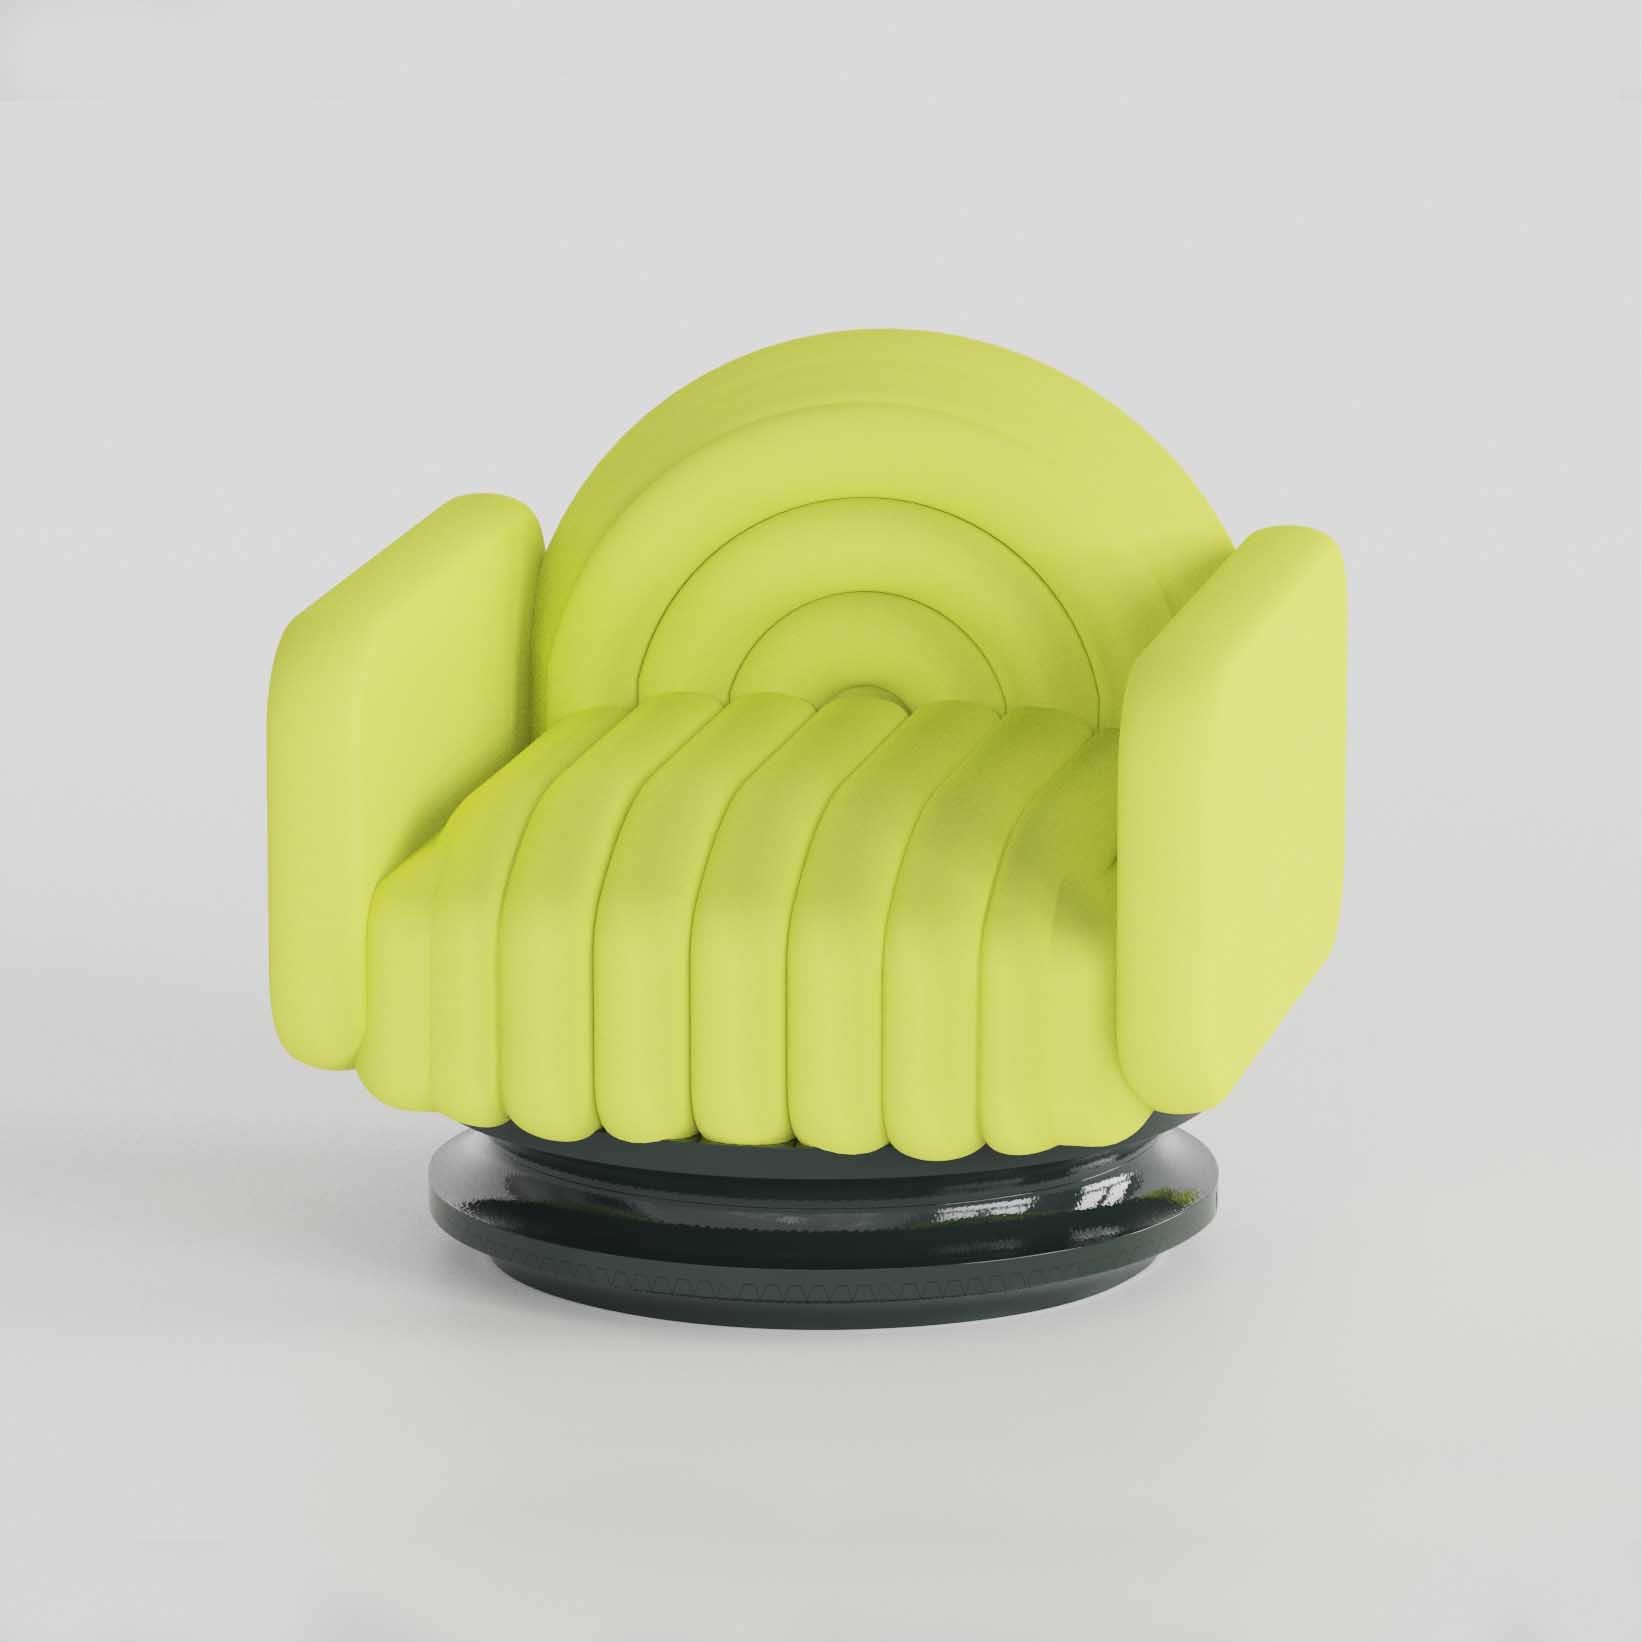 Mondos Club Chair - Collaboration with Chet Architecture